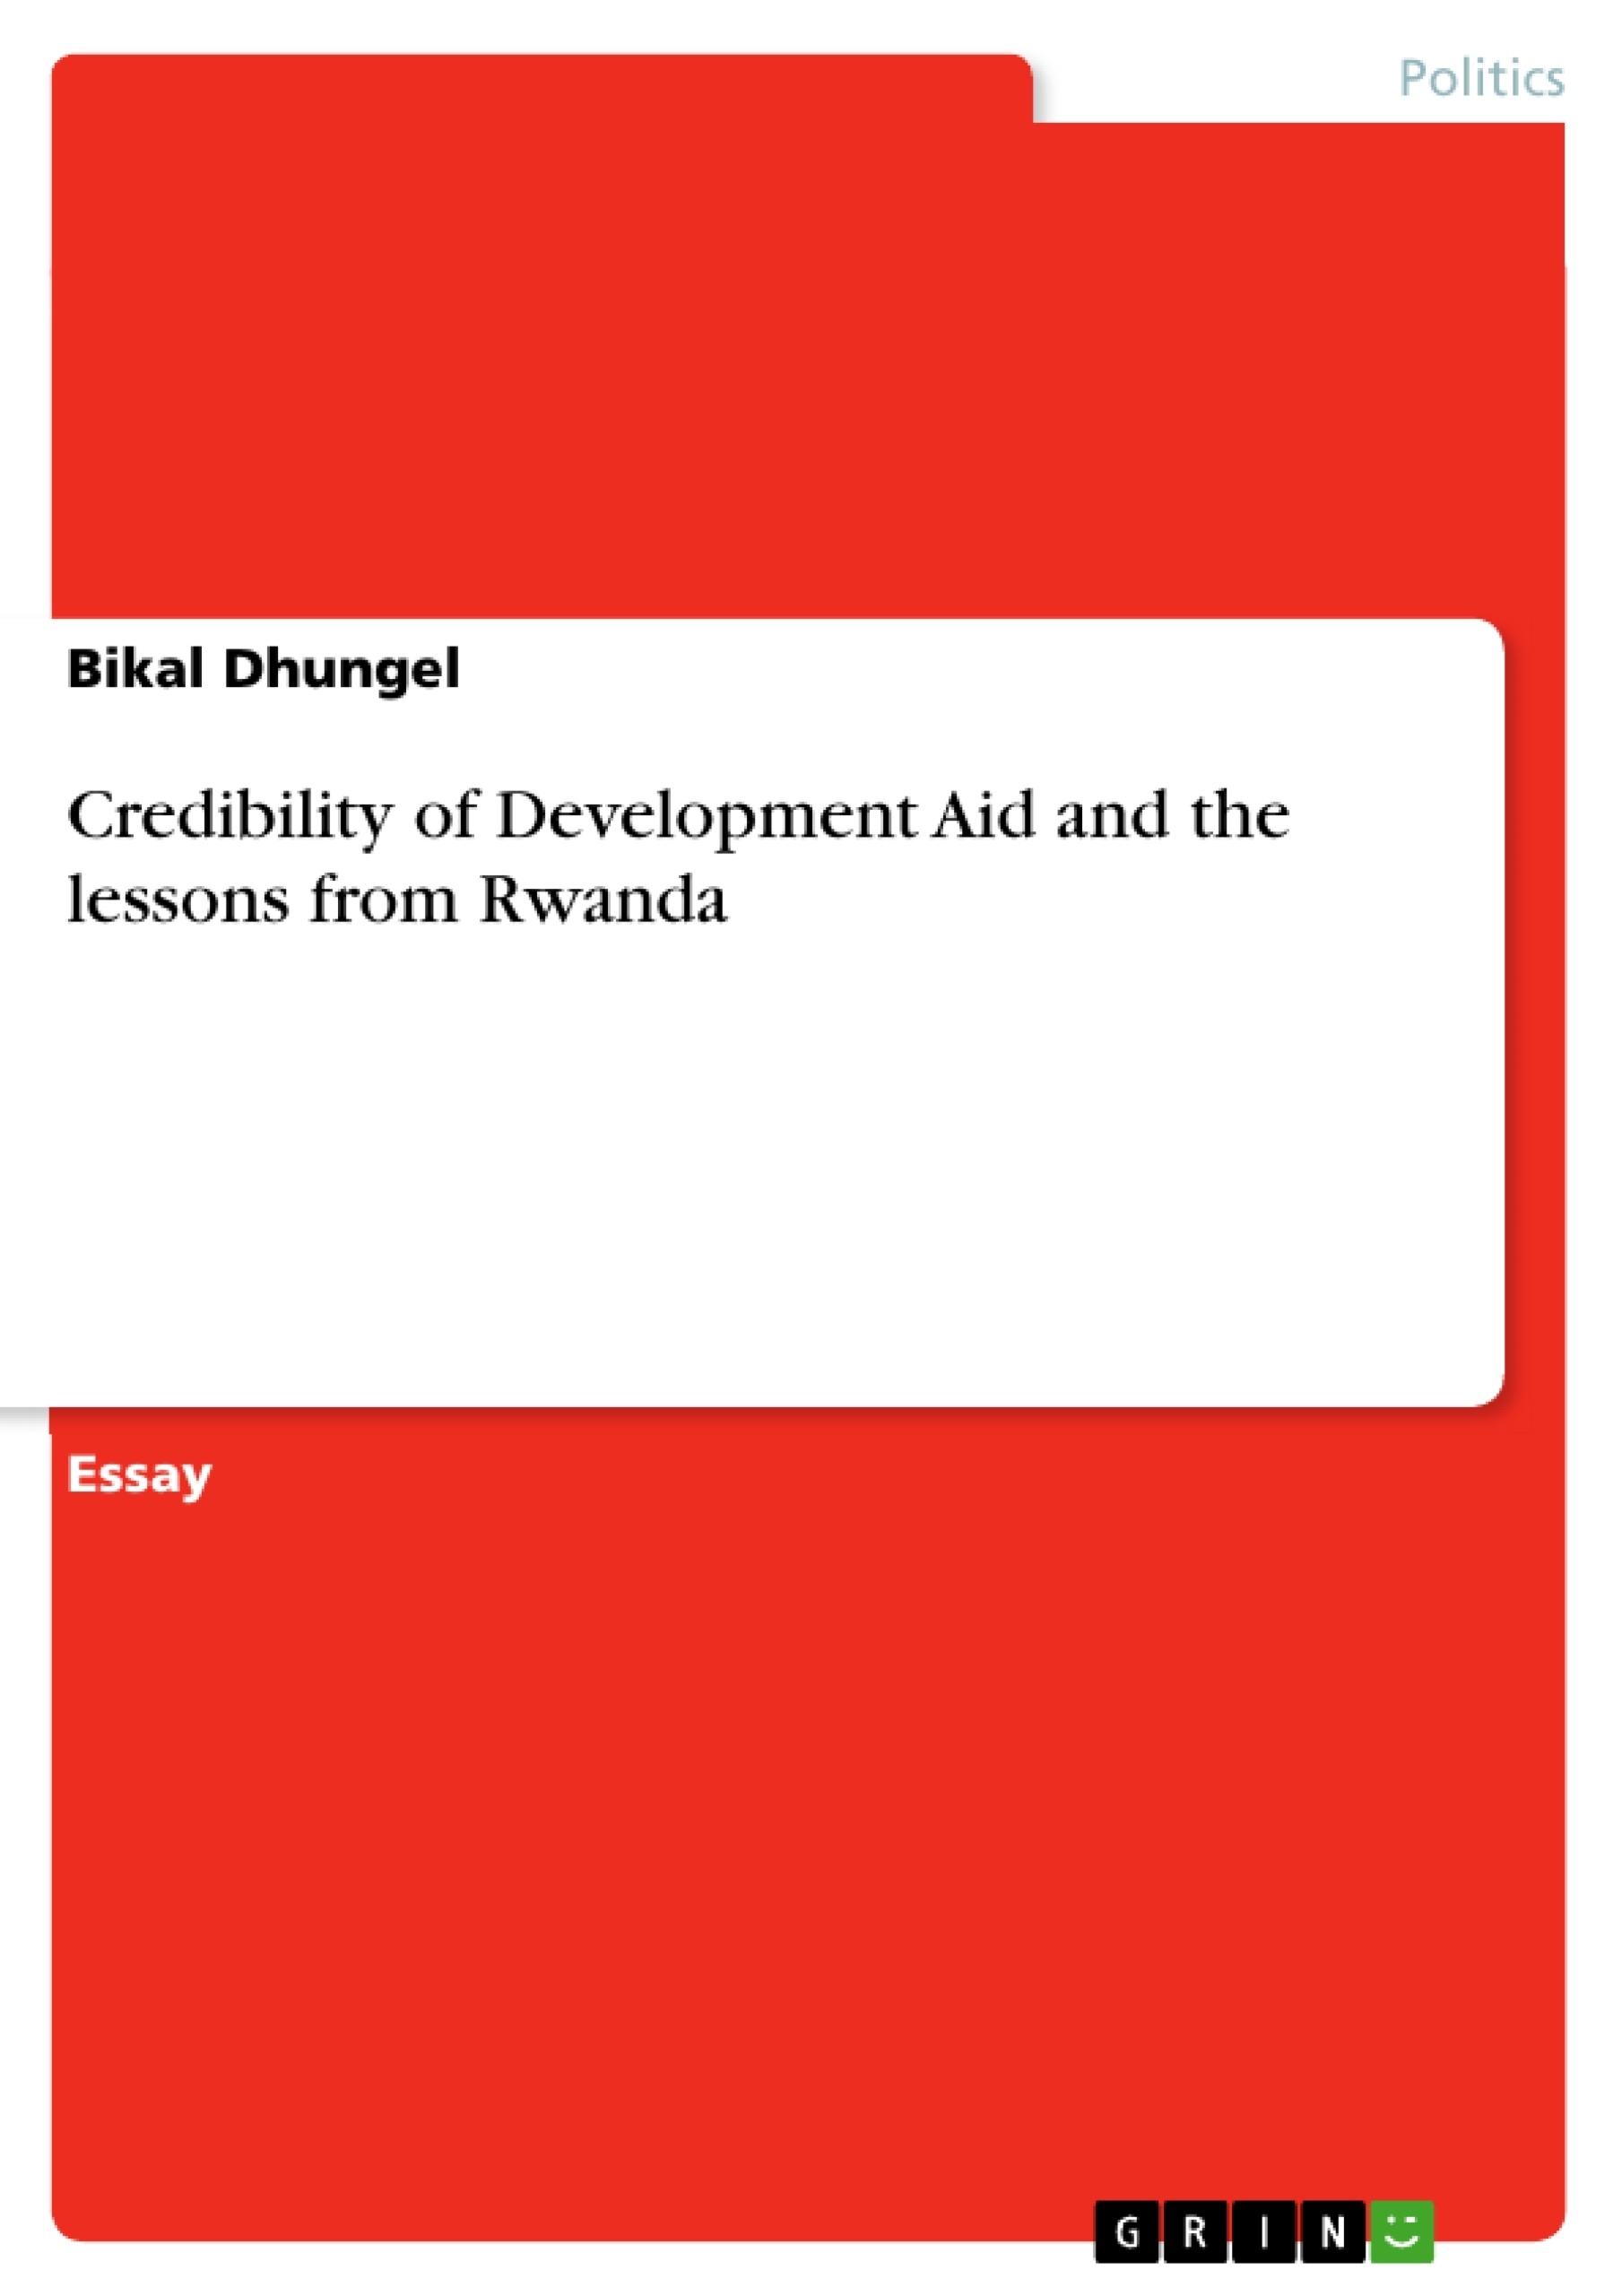 Title: Credibility of Development Aid and the lessons from Rwanda